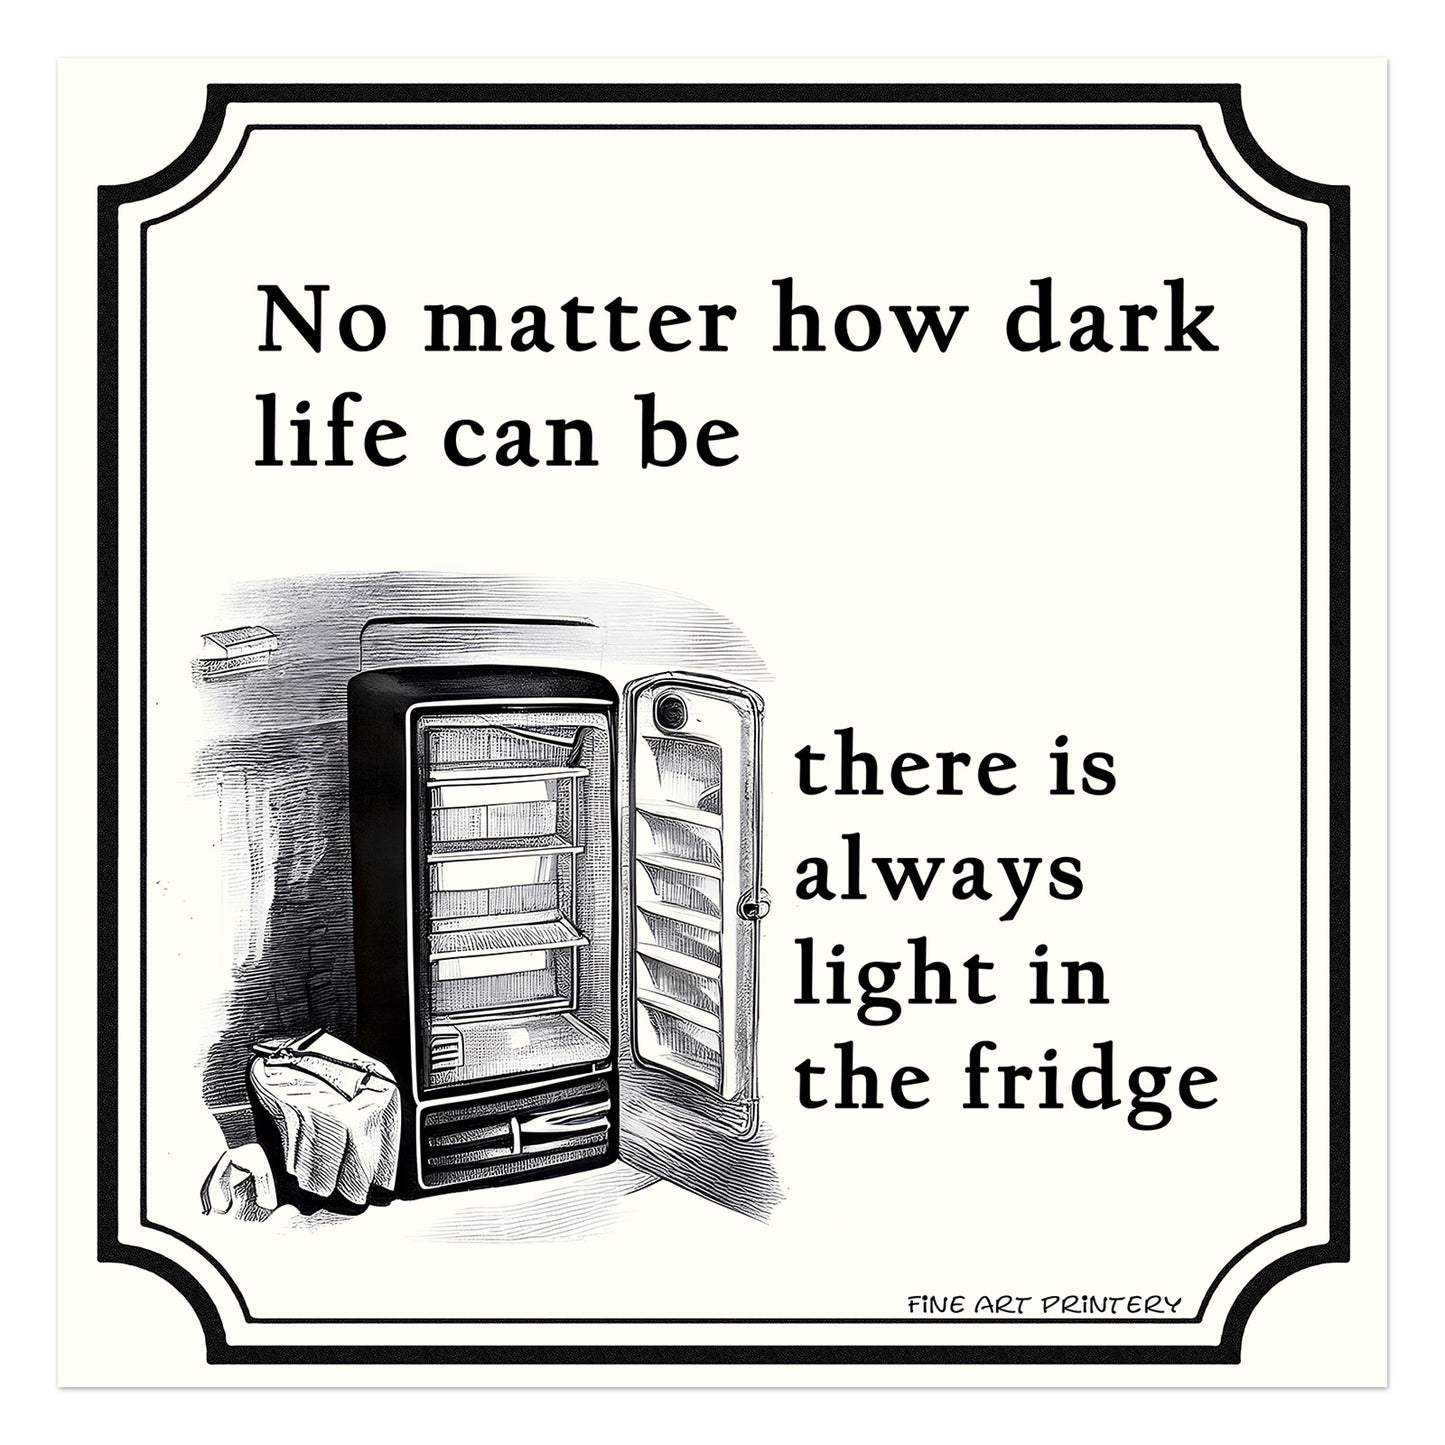 No matter how dark life can be, there is always light in the fridge